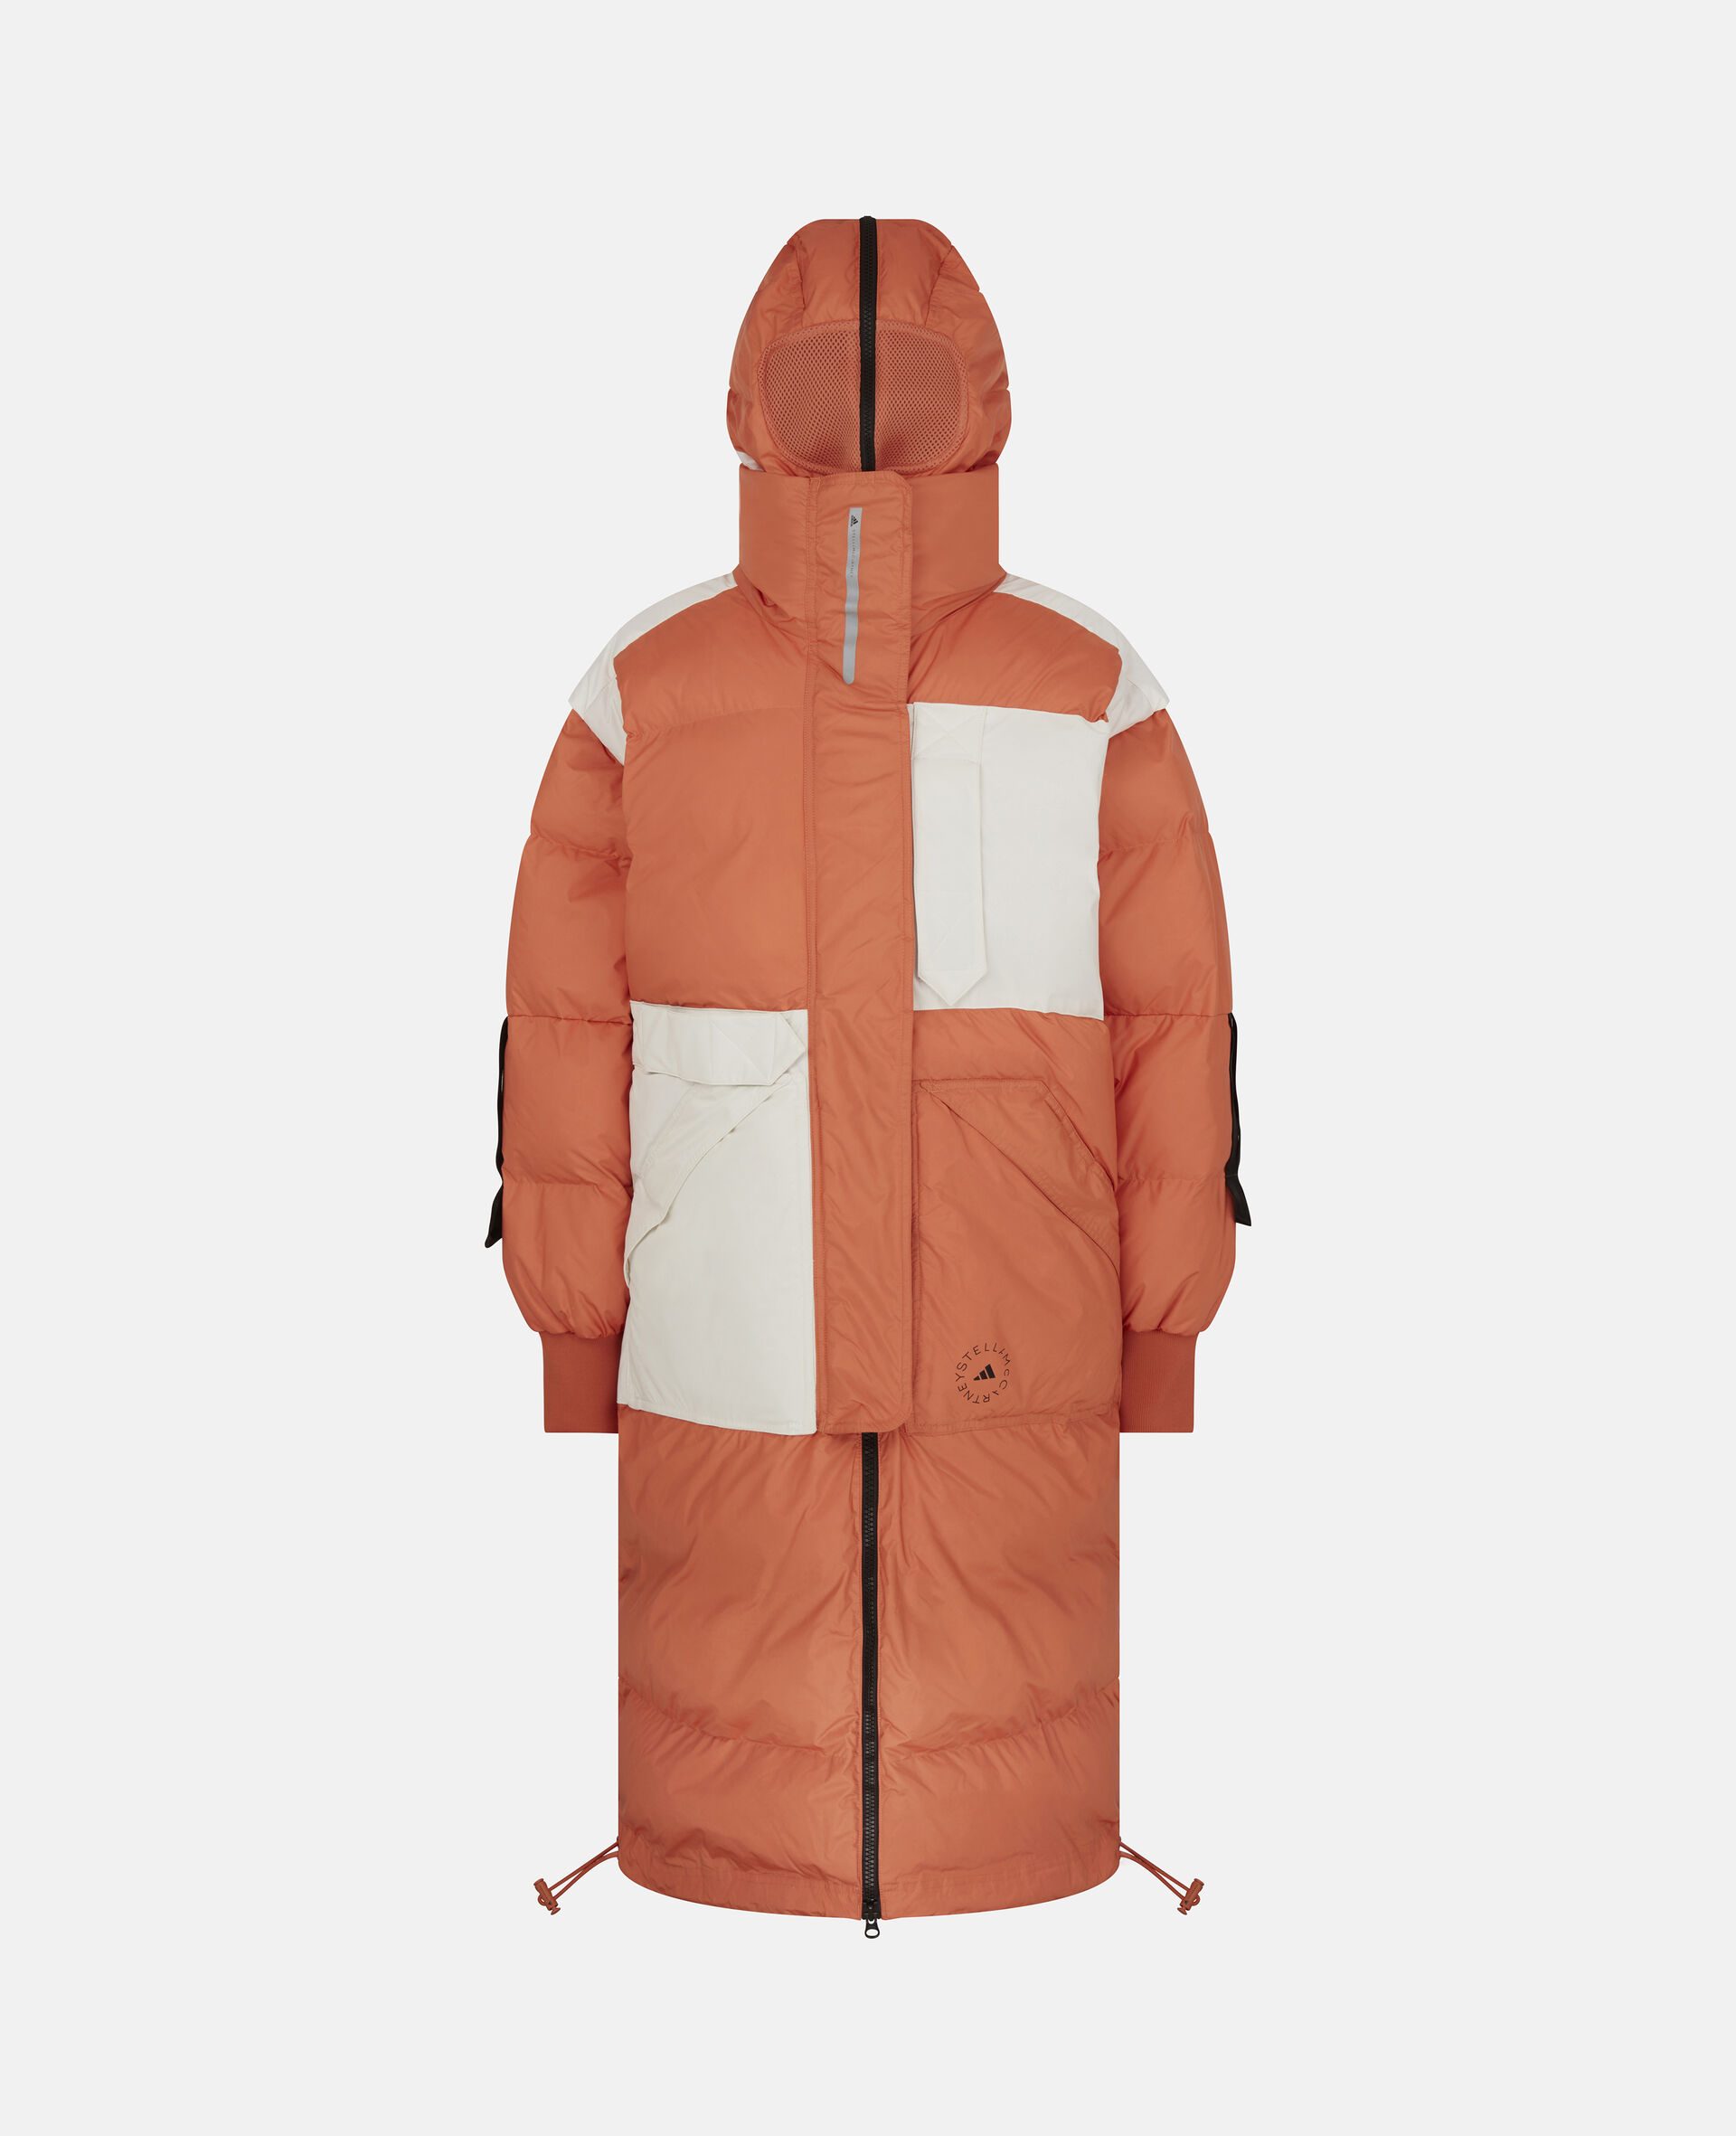 Dusted Clay and White Earth Protector Puffer-Orange-large